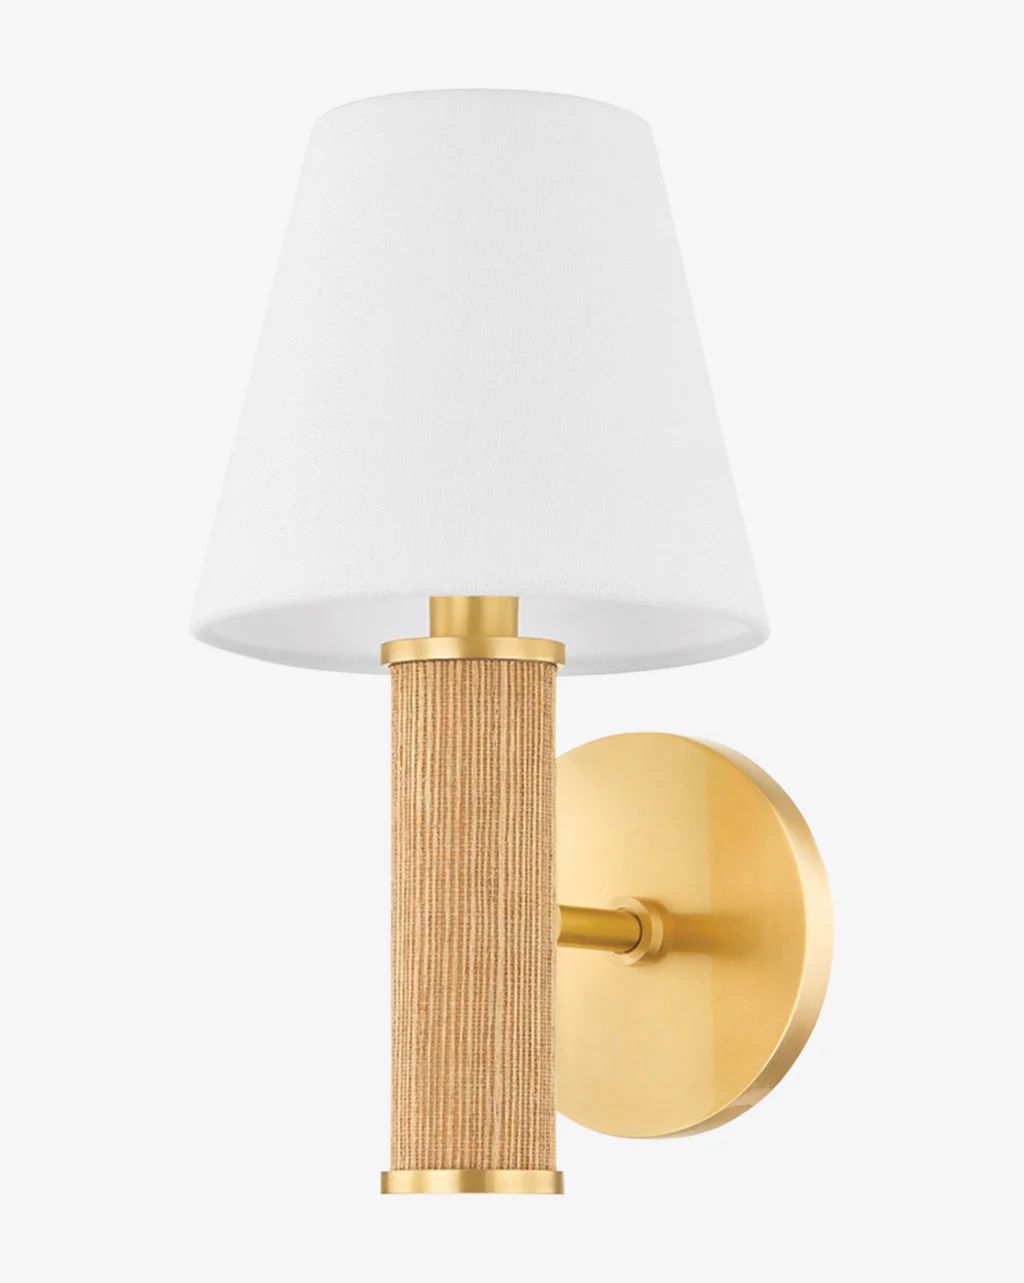 Amabella Wall Sconce | McGee & Co.